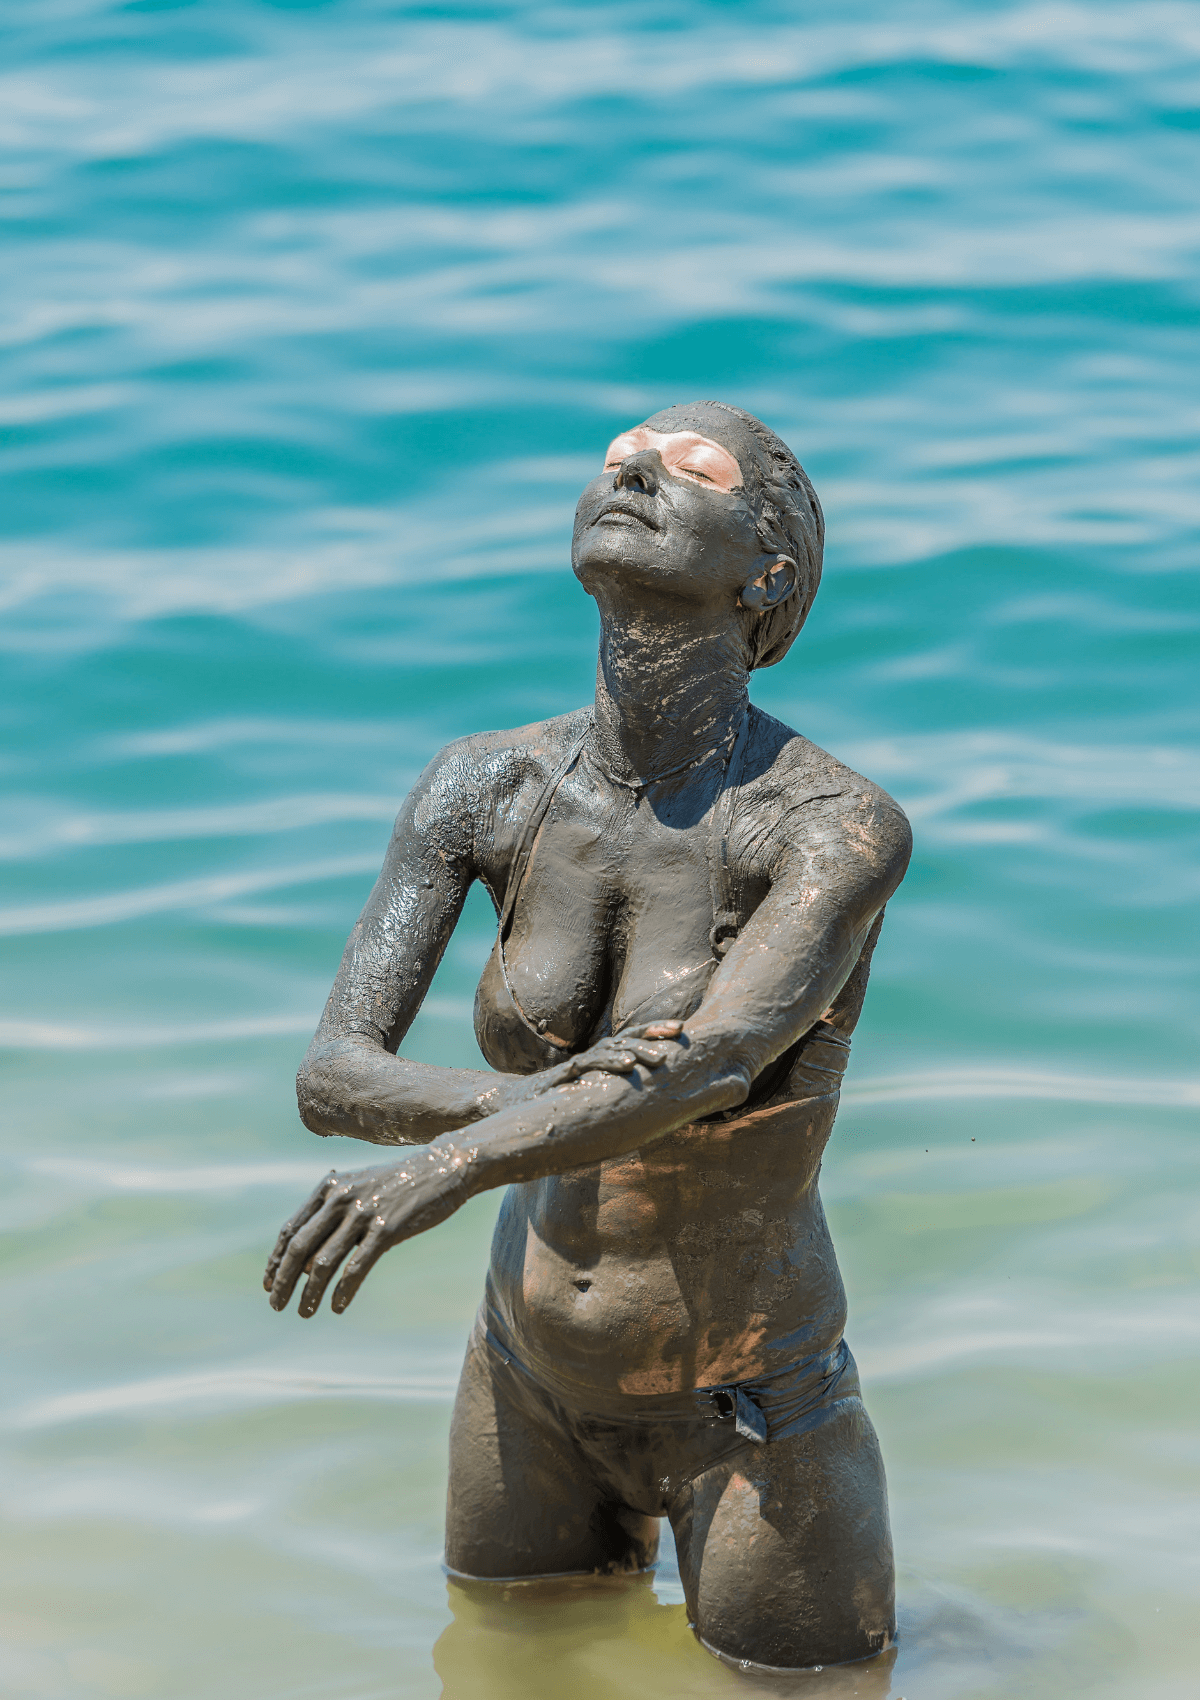 Woman covered in mud in the Dead Sea in Jordan - skincare products as Jordanian souvenirs